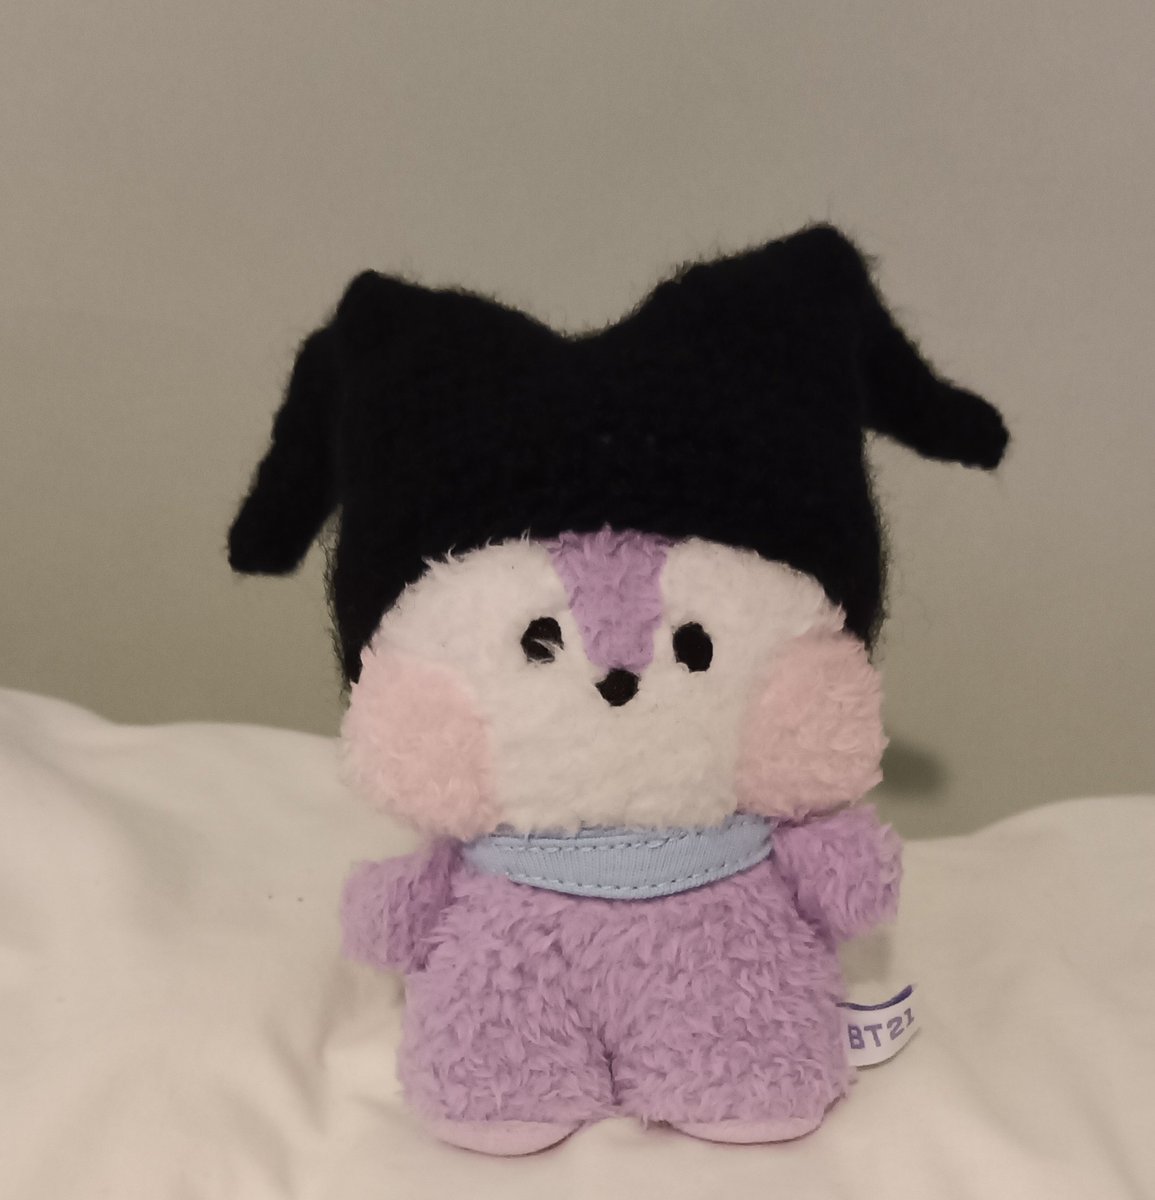 This crochet business is getting a bit out of hand... Baby Mang now has a jester hat!  😉

#JHOPE 
#JackInTheBox_HopeEdition